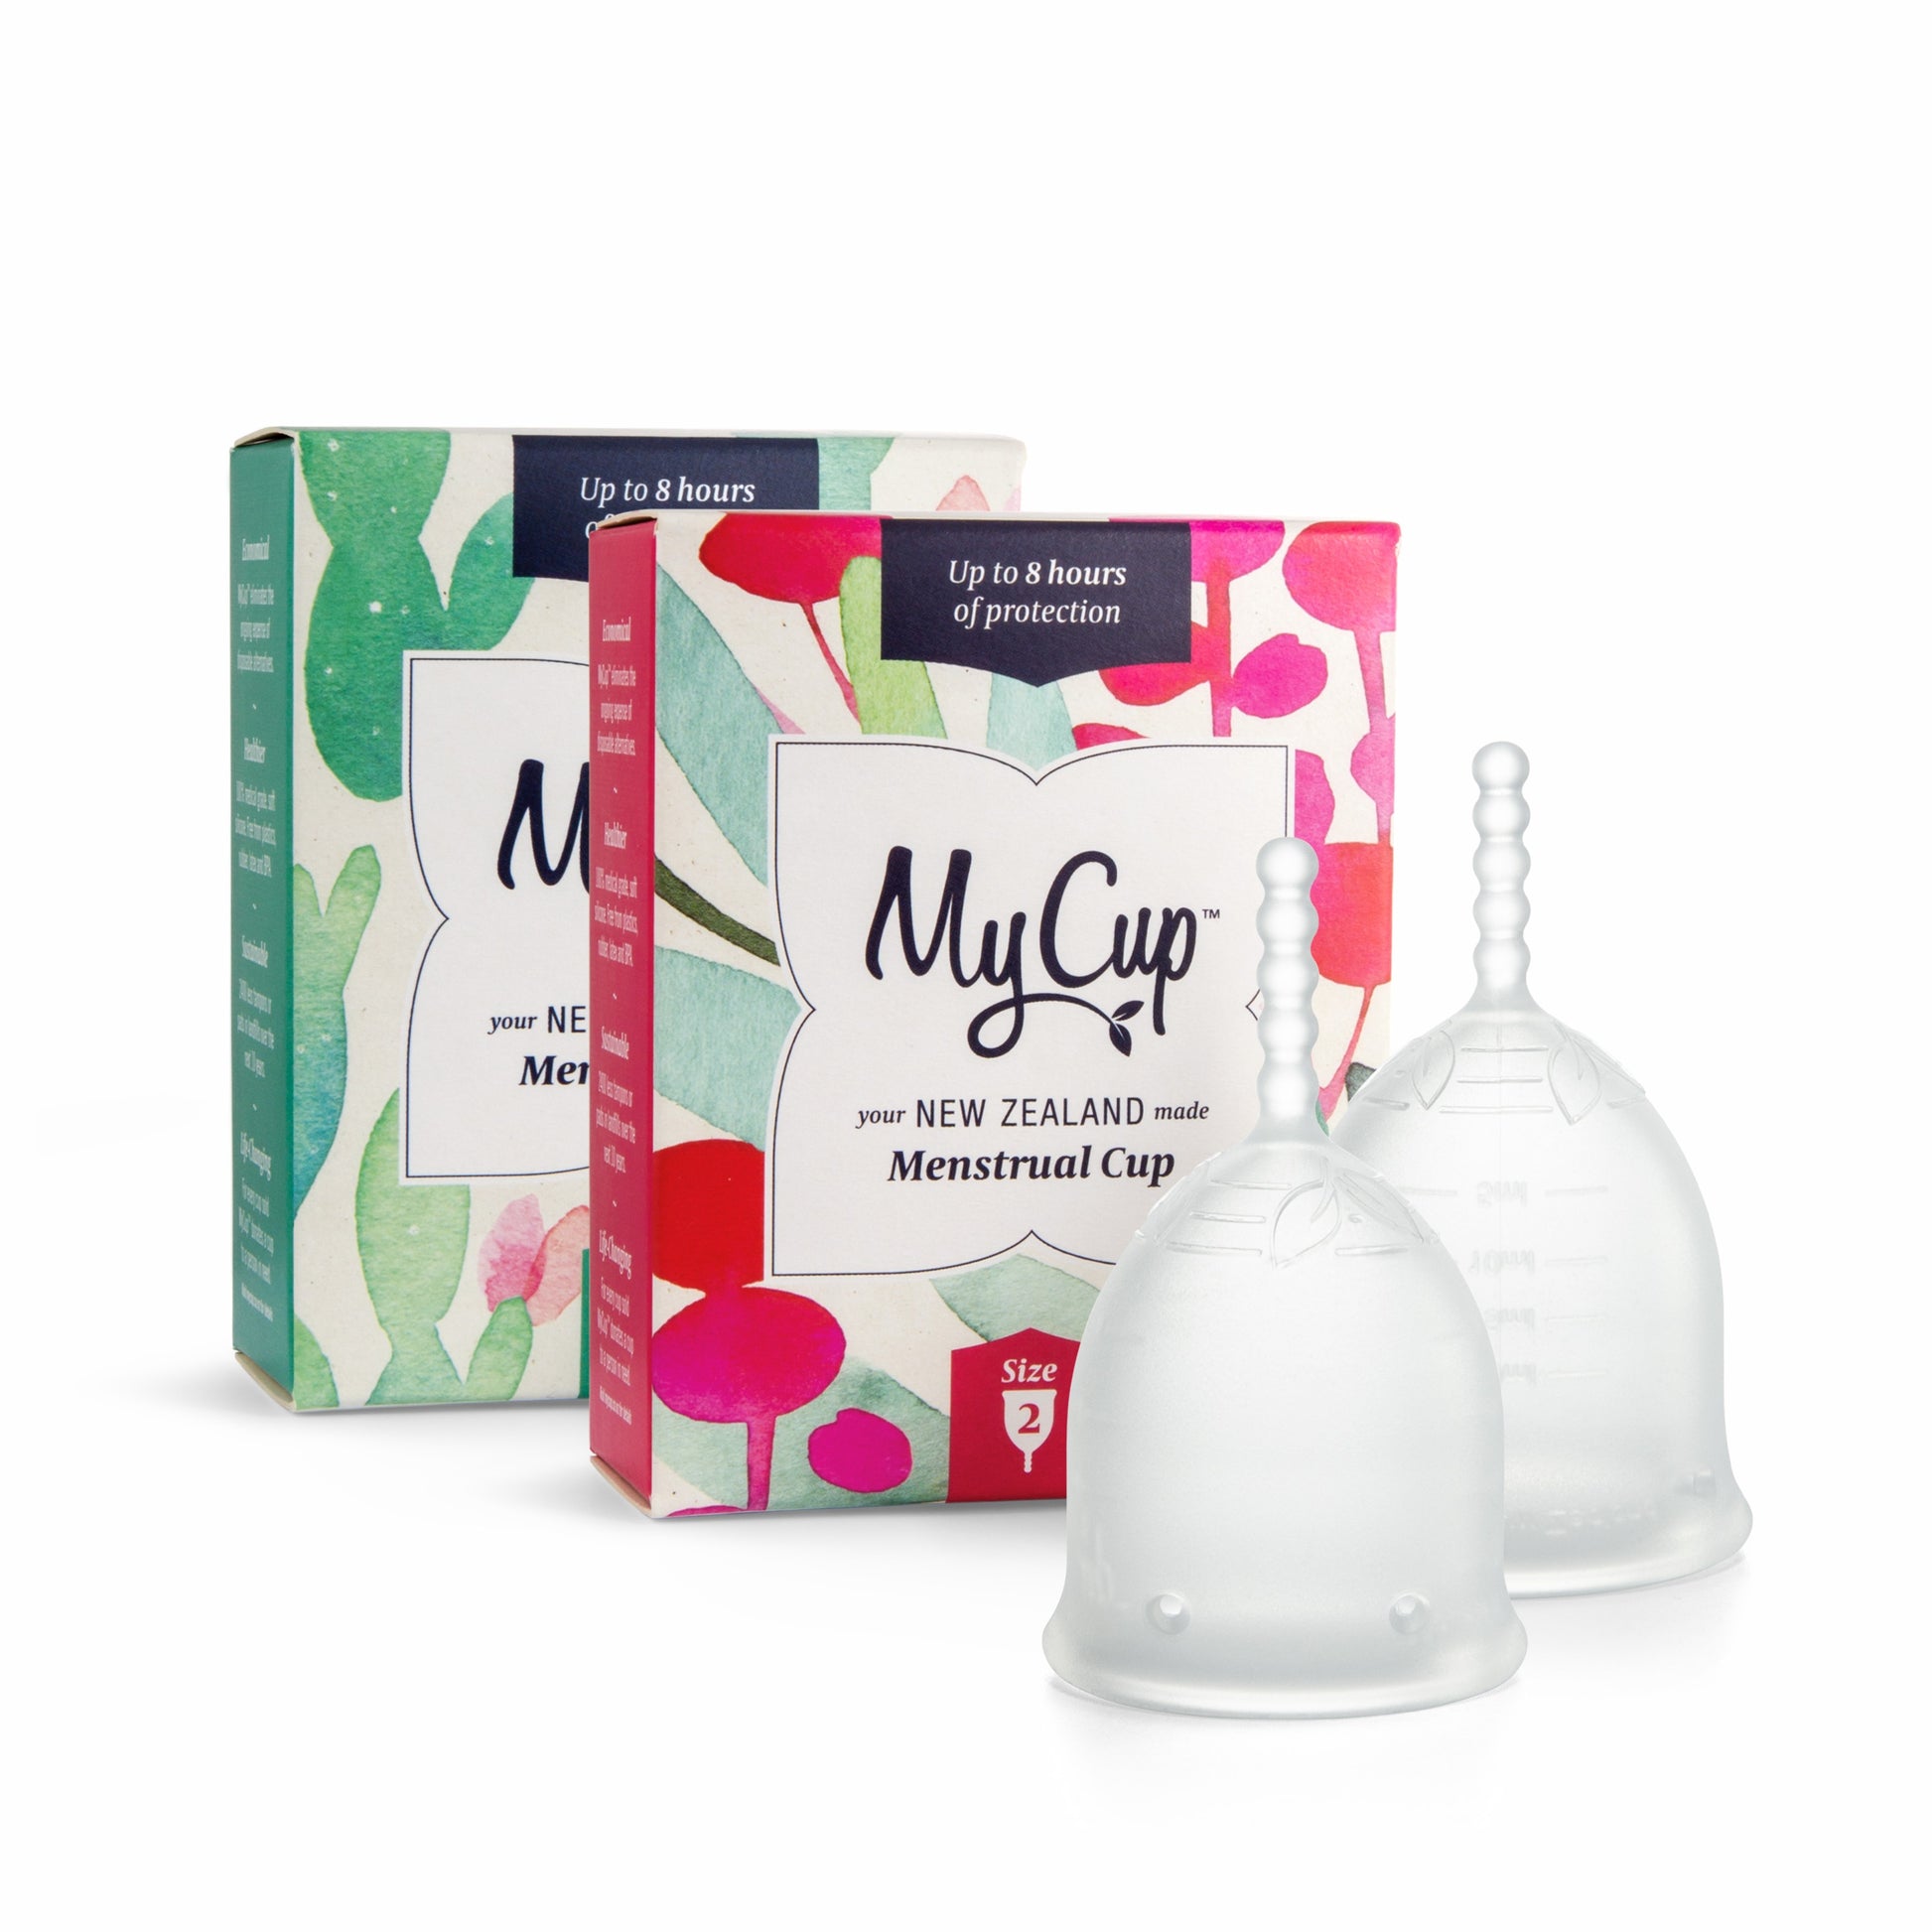 Image showing two My Cup menstrual cup products